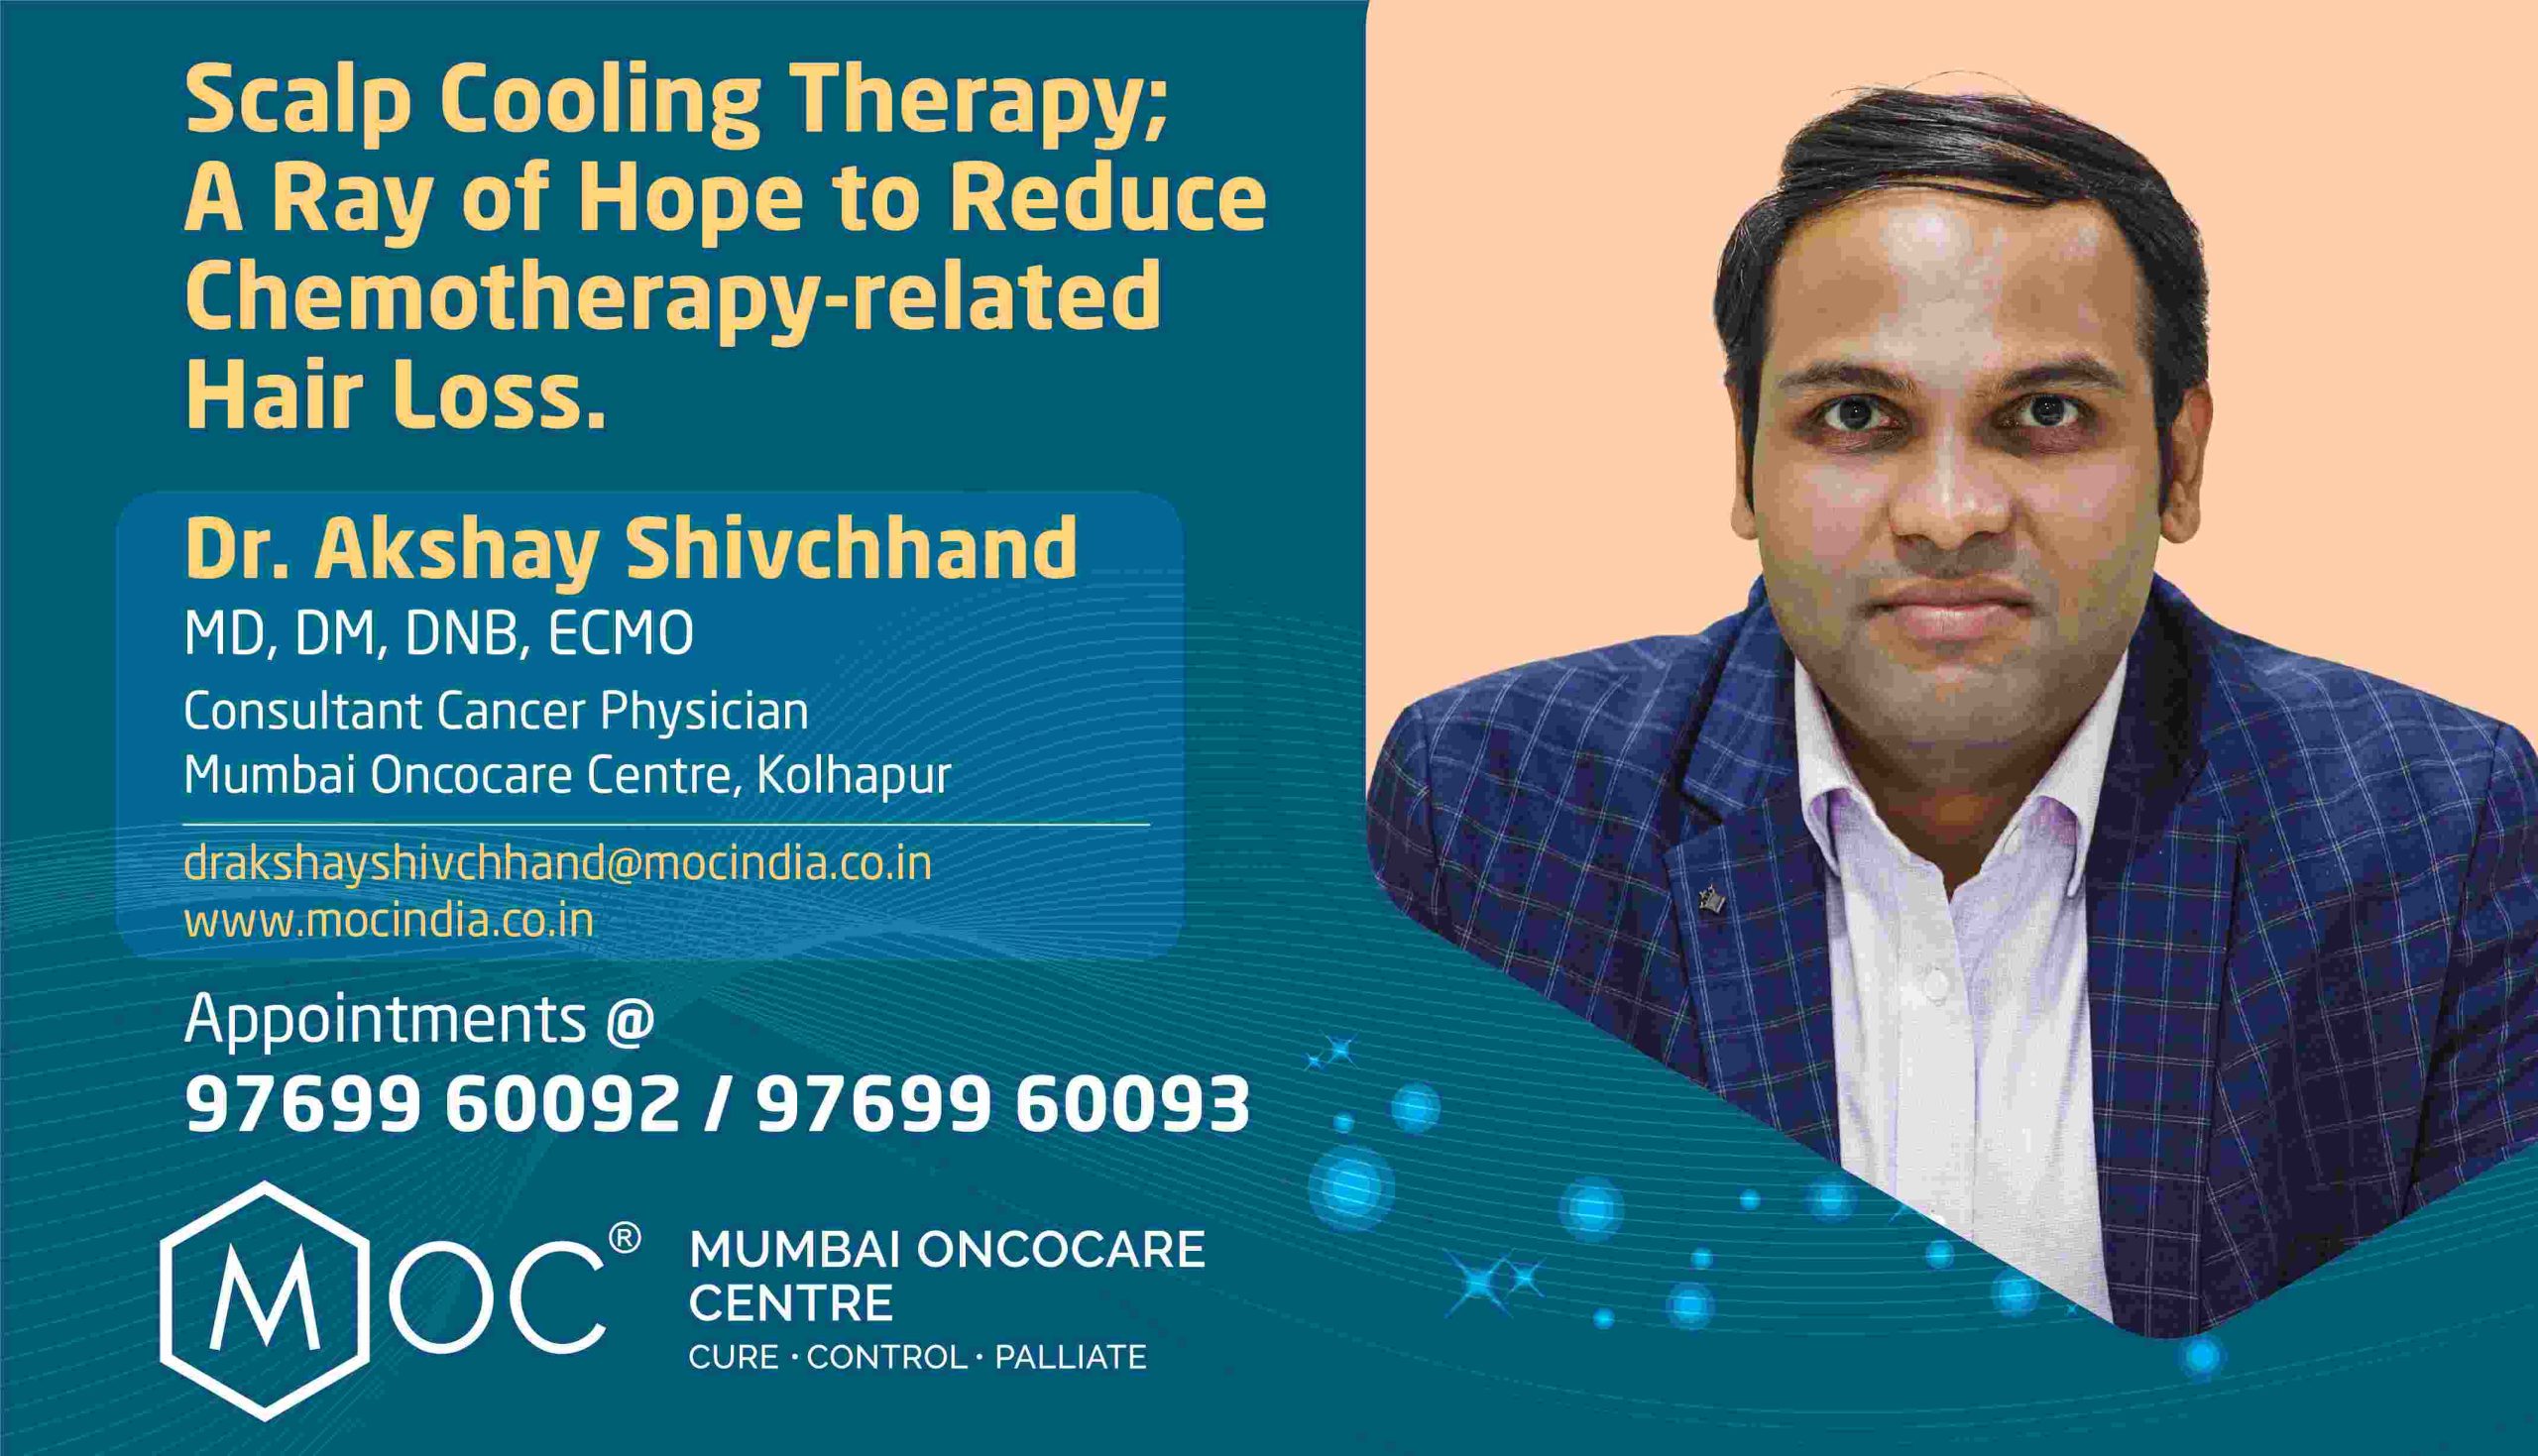 Scalp Cooling Therapy: A Ray of Hope to Reduce Chemotherapy-Related Hair Loss | Dr. Akshay Shivchhand | Consultant Cancer Physician | Mumbai Oncocare, Kolhapur
